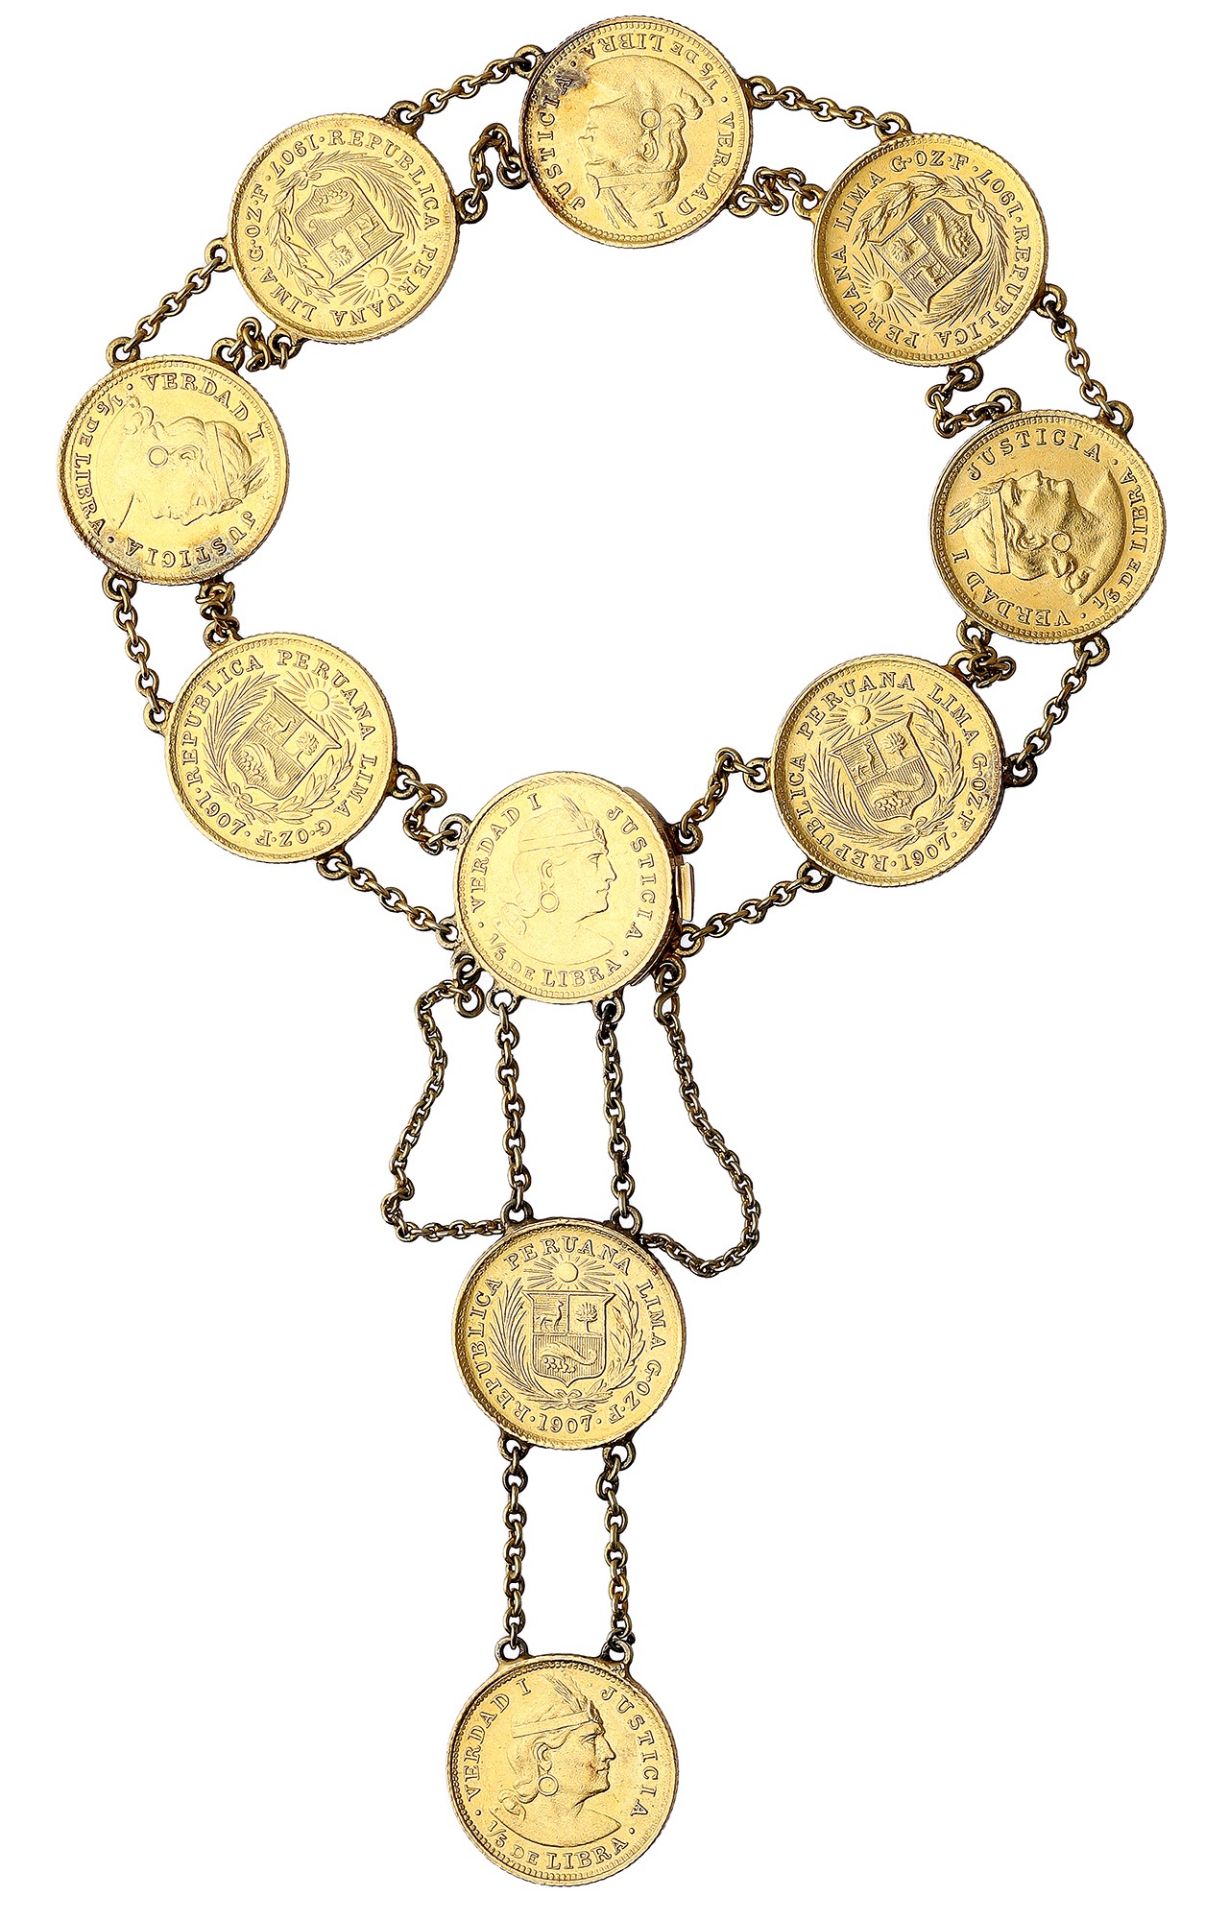 A gold coin bracelet, formed as a series of ten 1907 Peru 1/5 libra coins, between chain con...